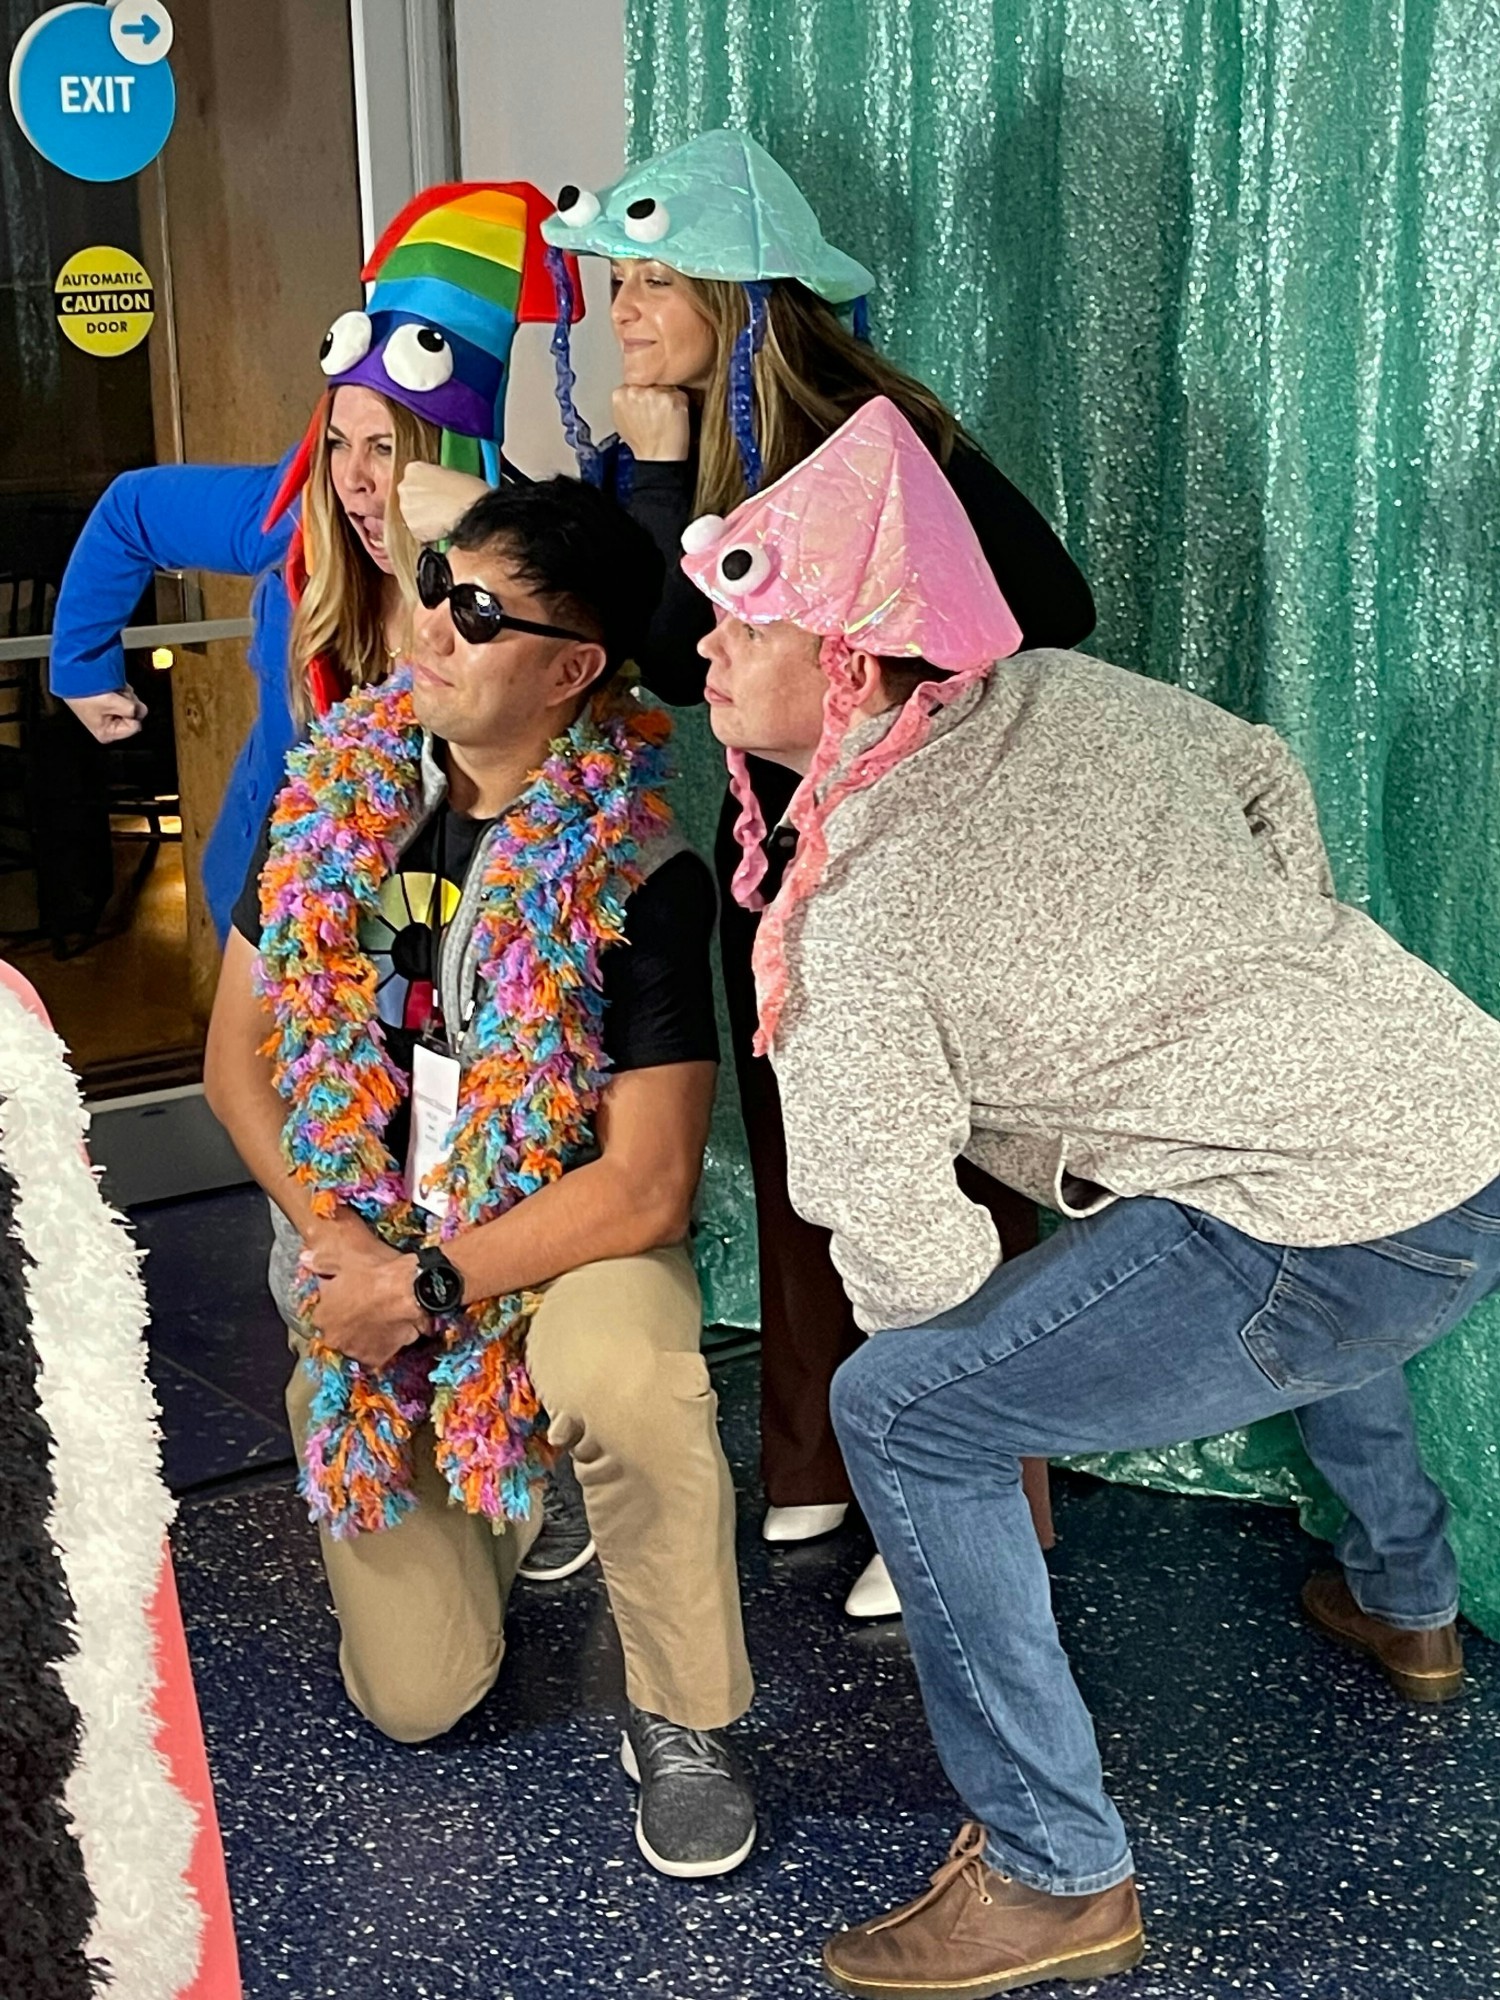 Litmus colleagues having fun in a photo booth at the 2023 All-Staff company retreat